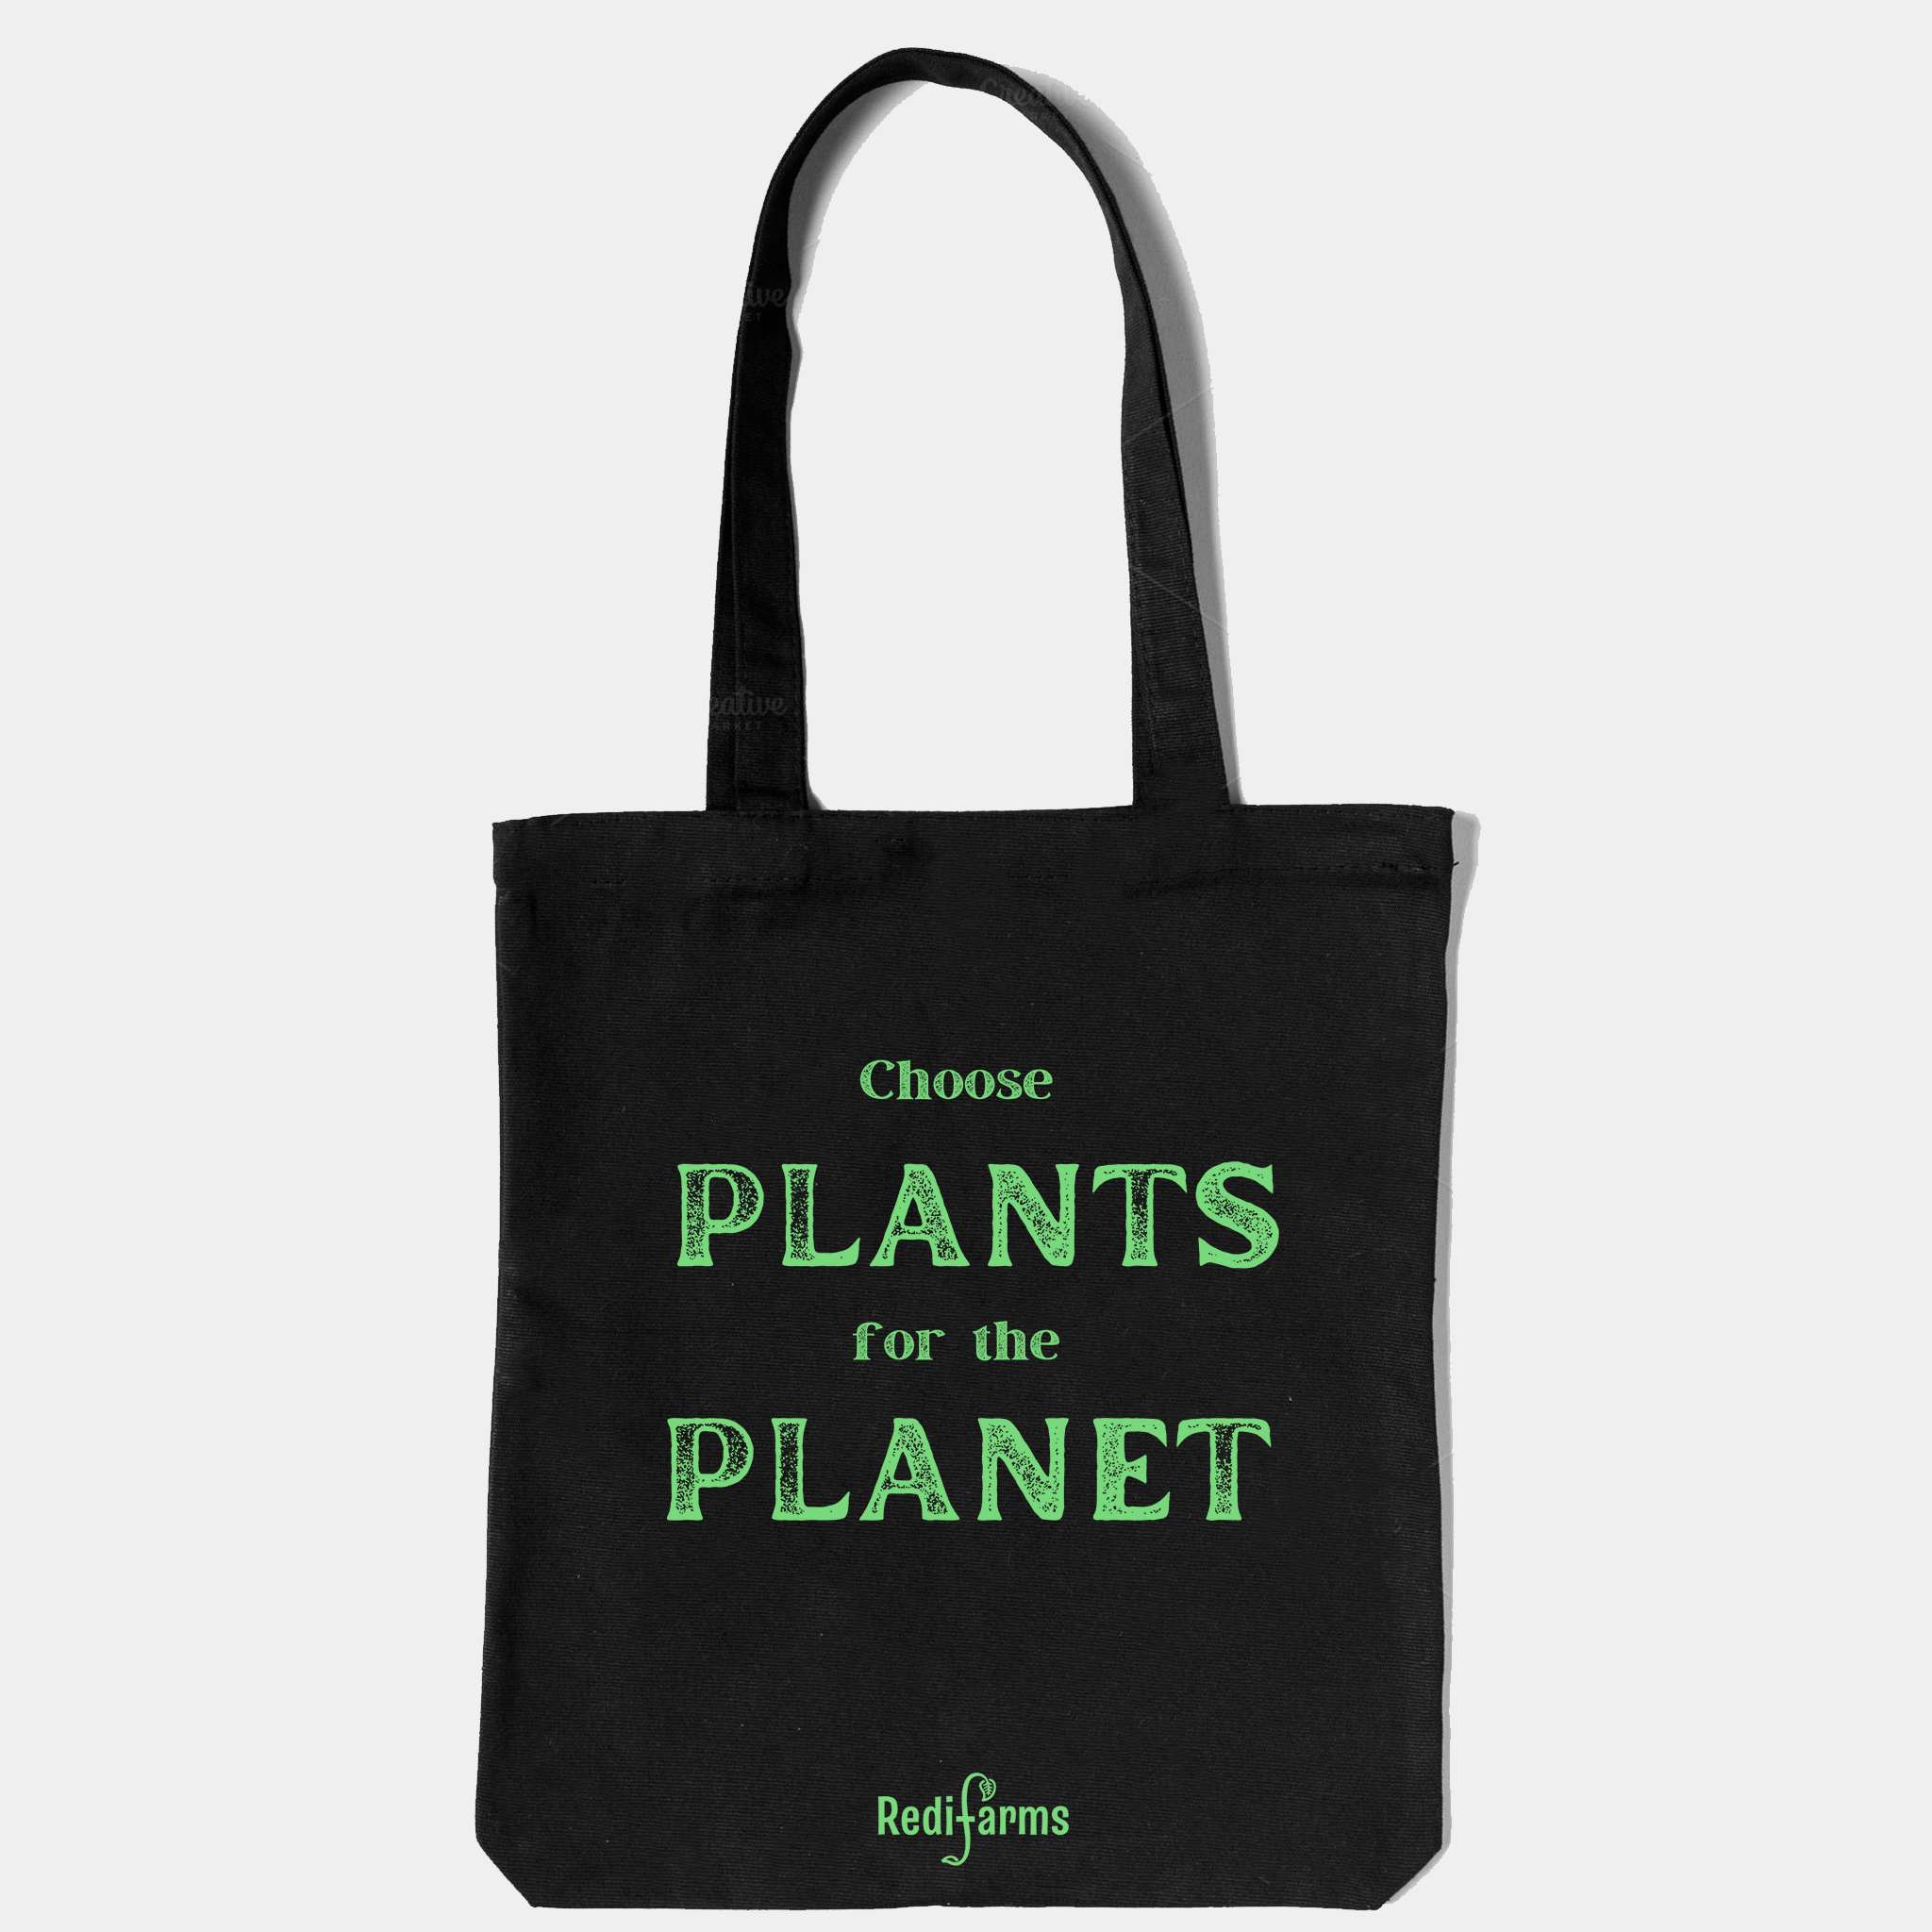 Plants for the planet totebag sold by Redifarms